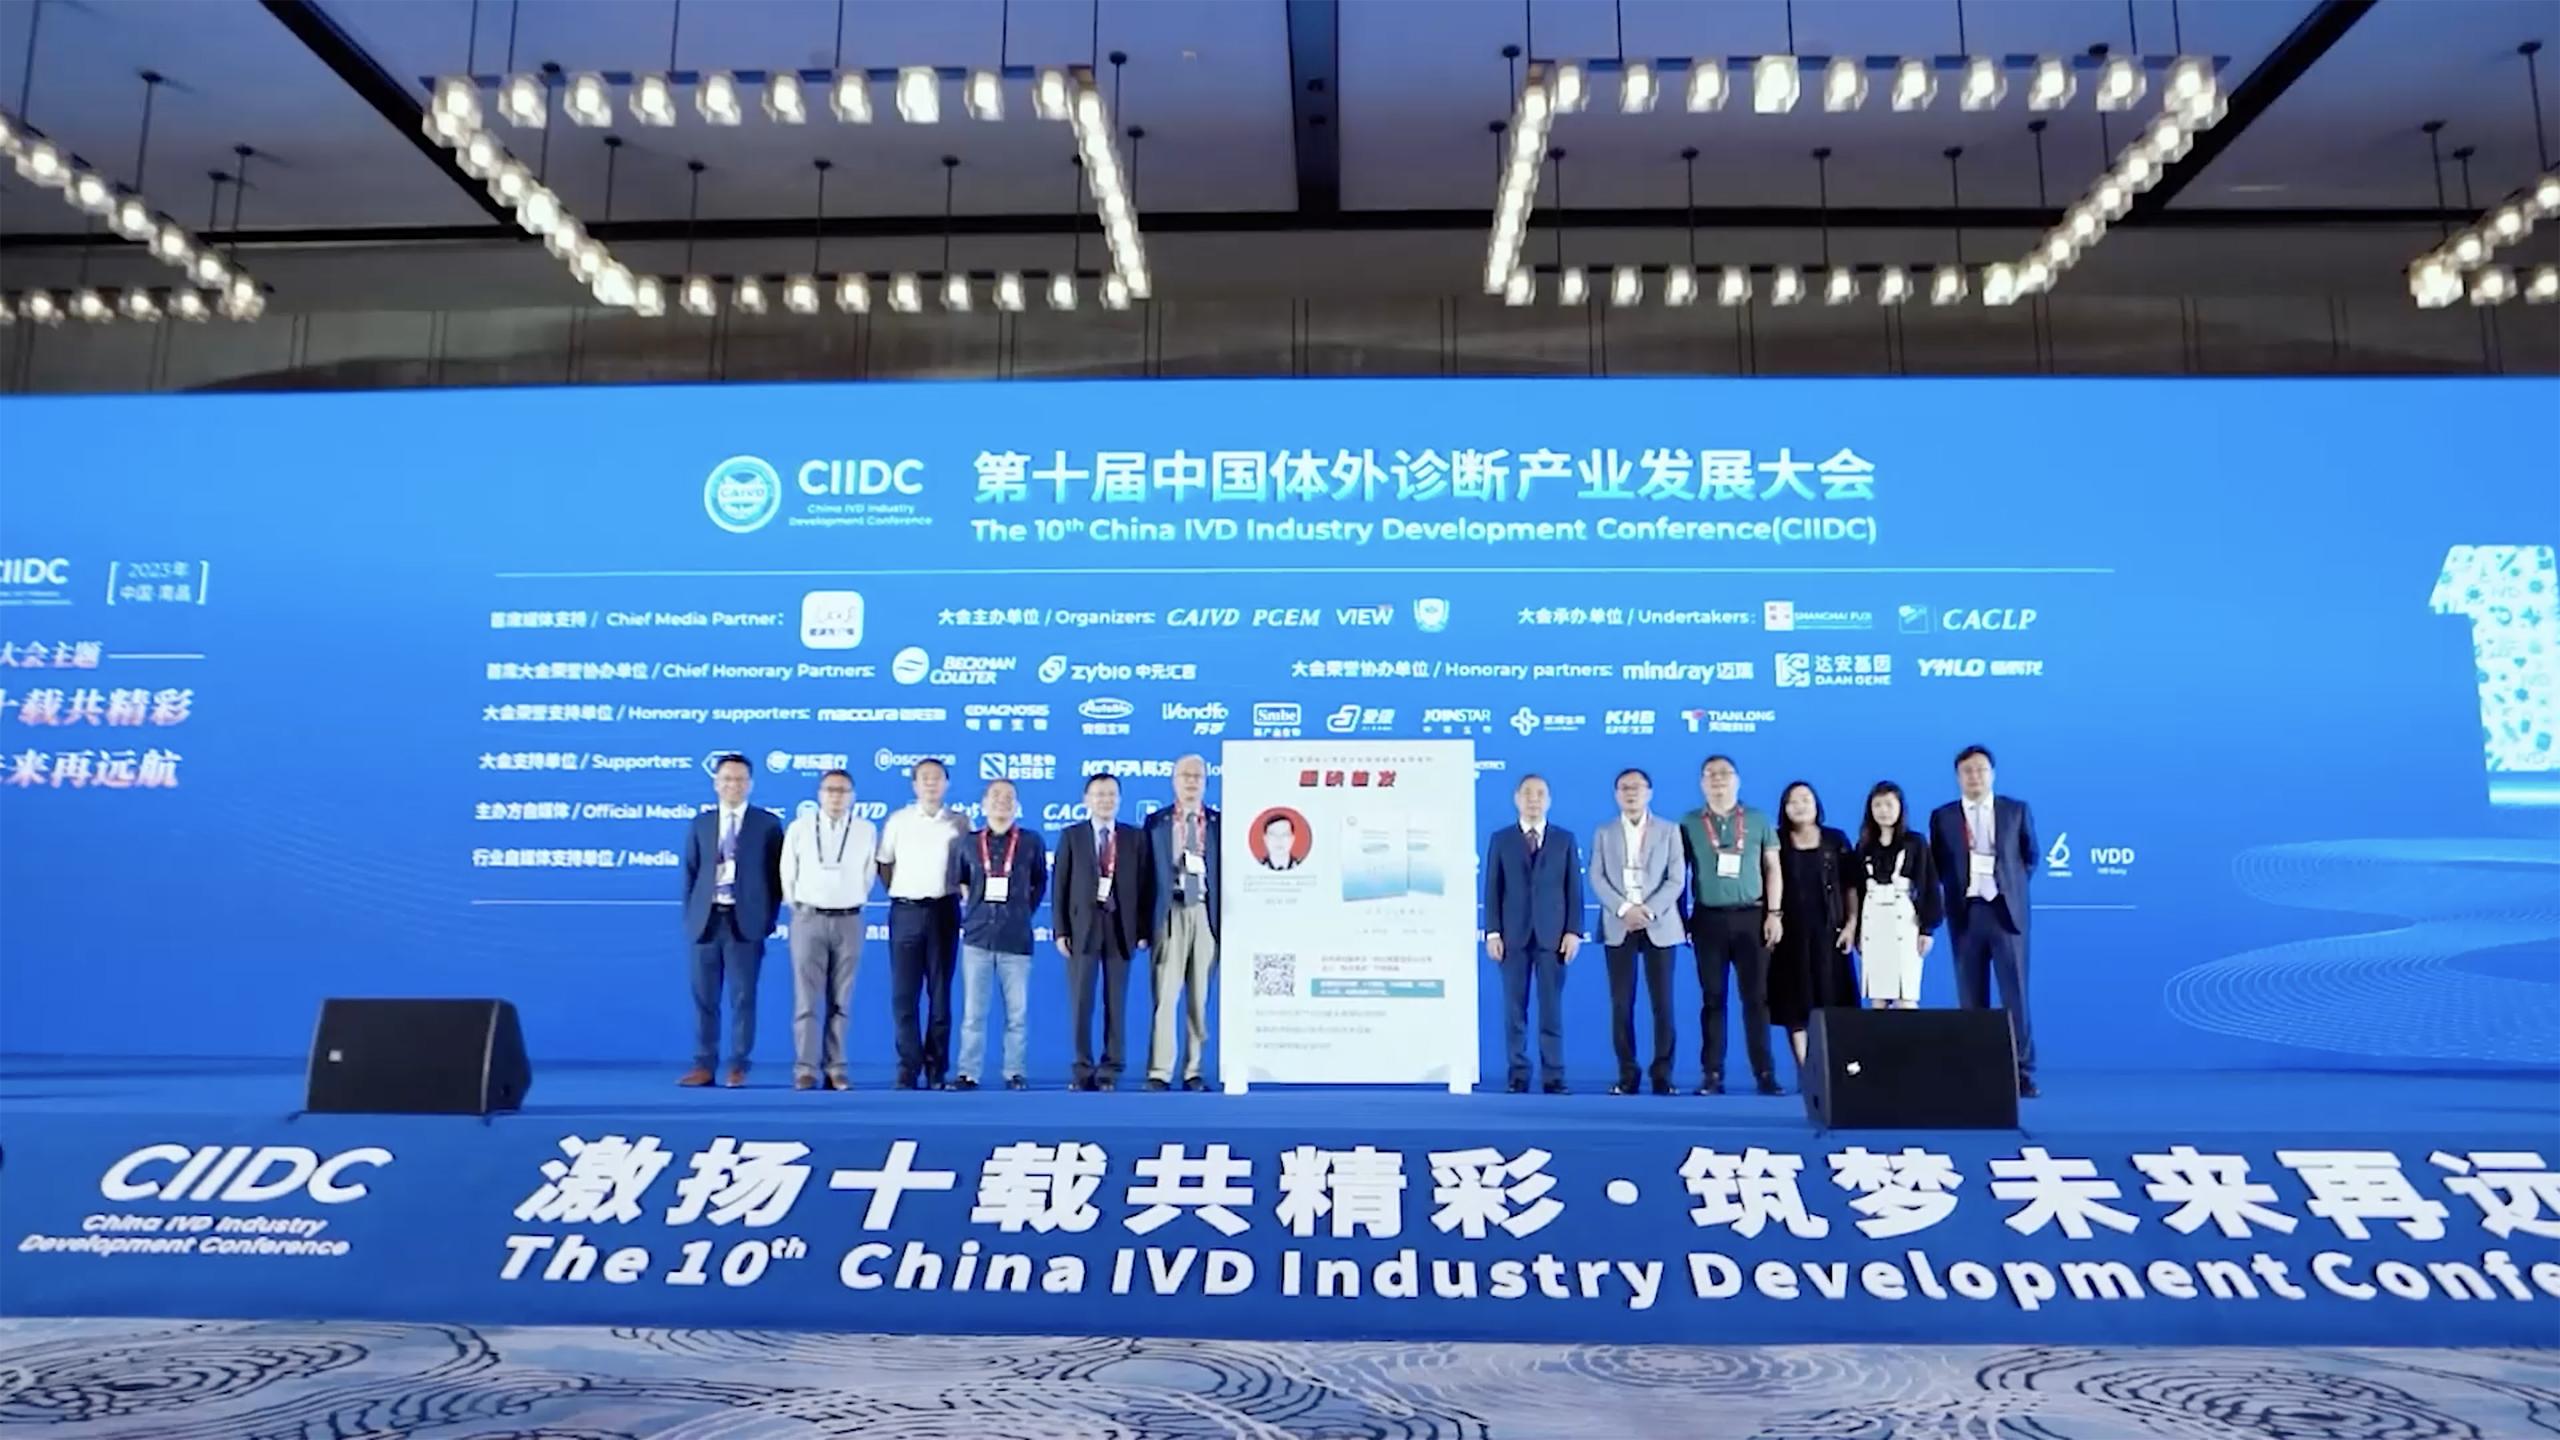 The 10th China IVD Industry Development Conference (CIIDC)